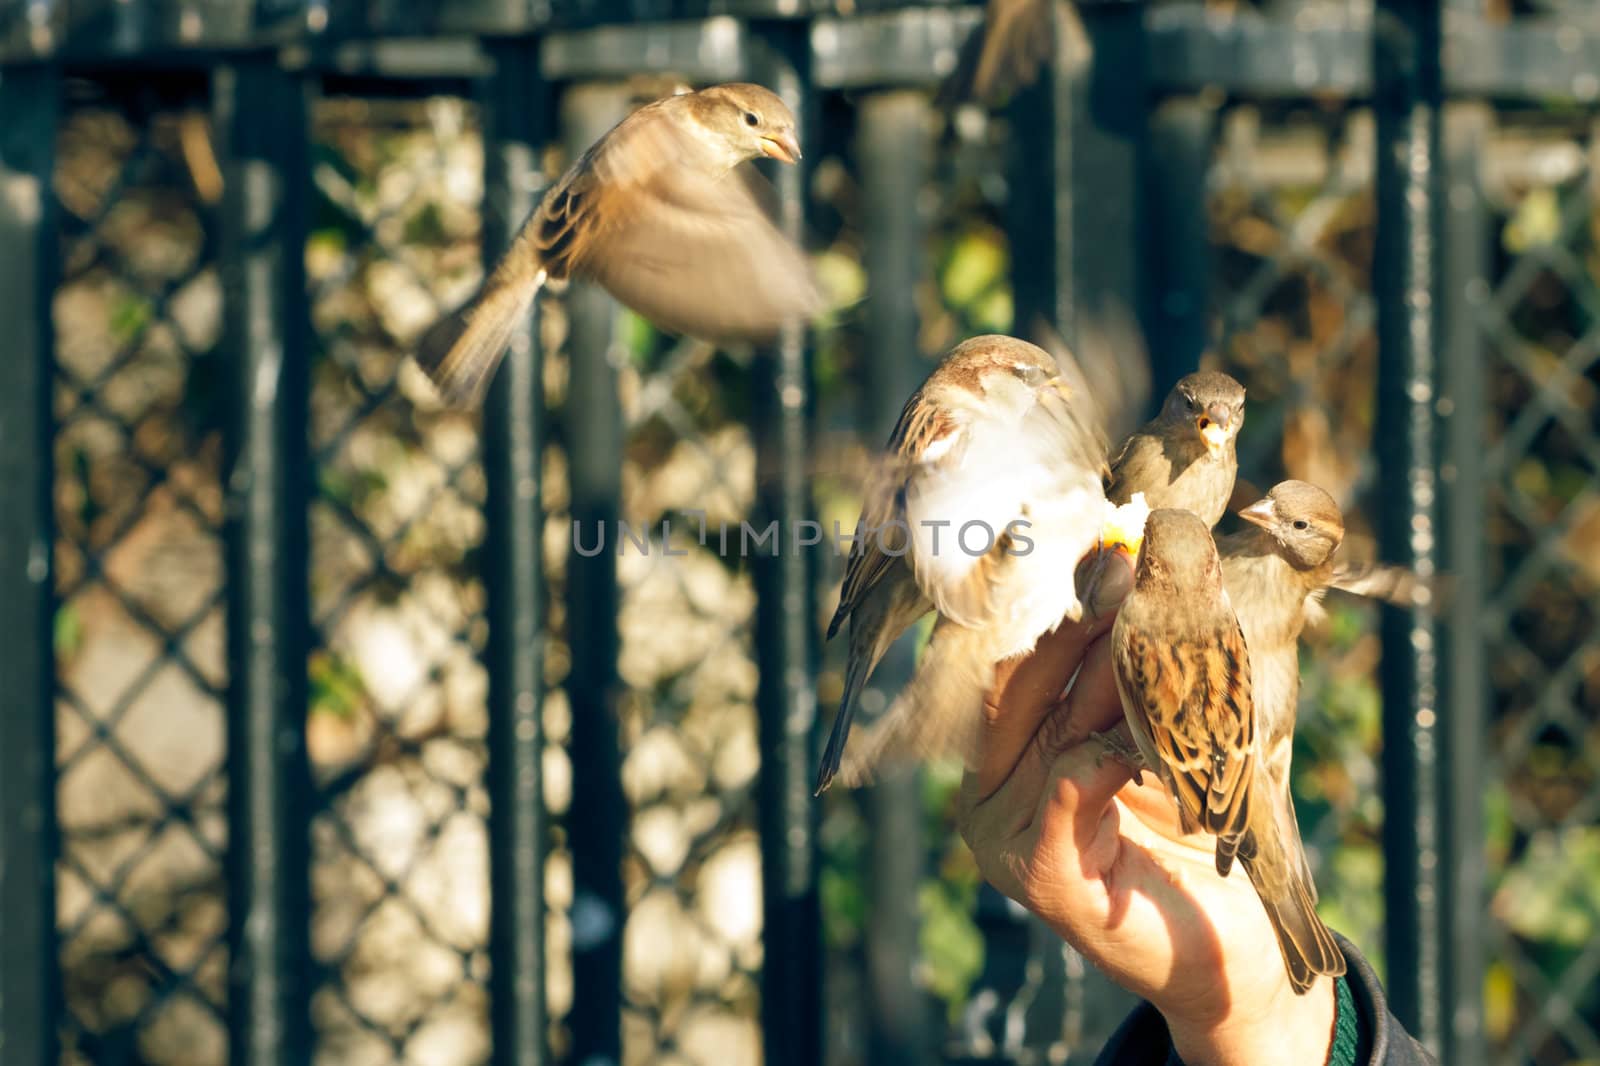 Sparrows eating from a human hand with motion blurred wings by Lamarinx